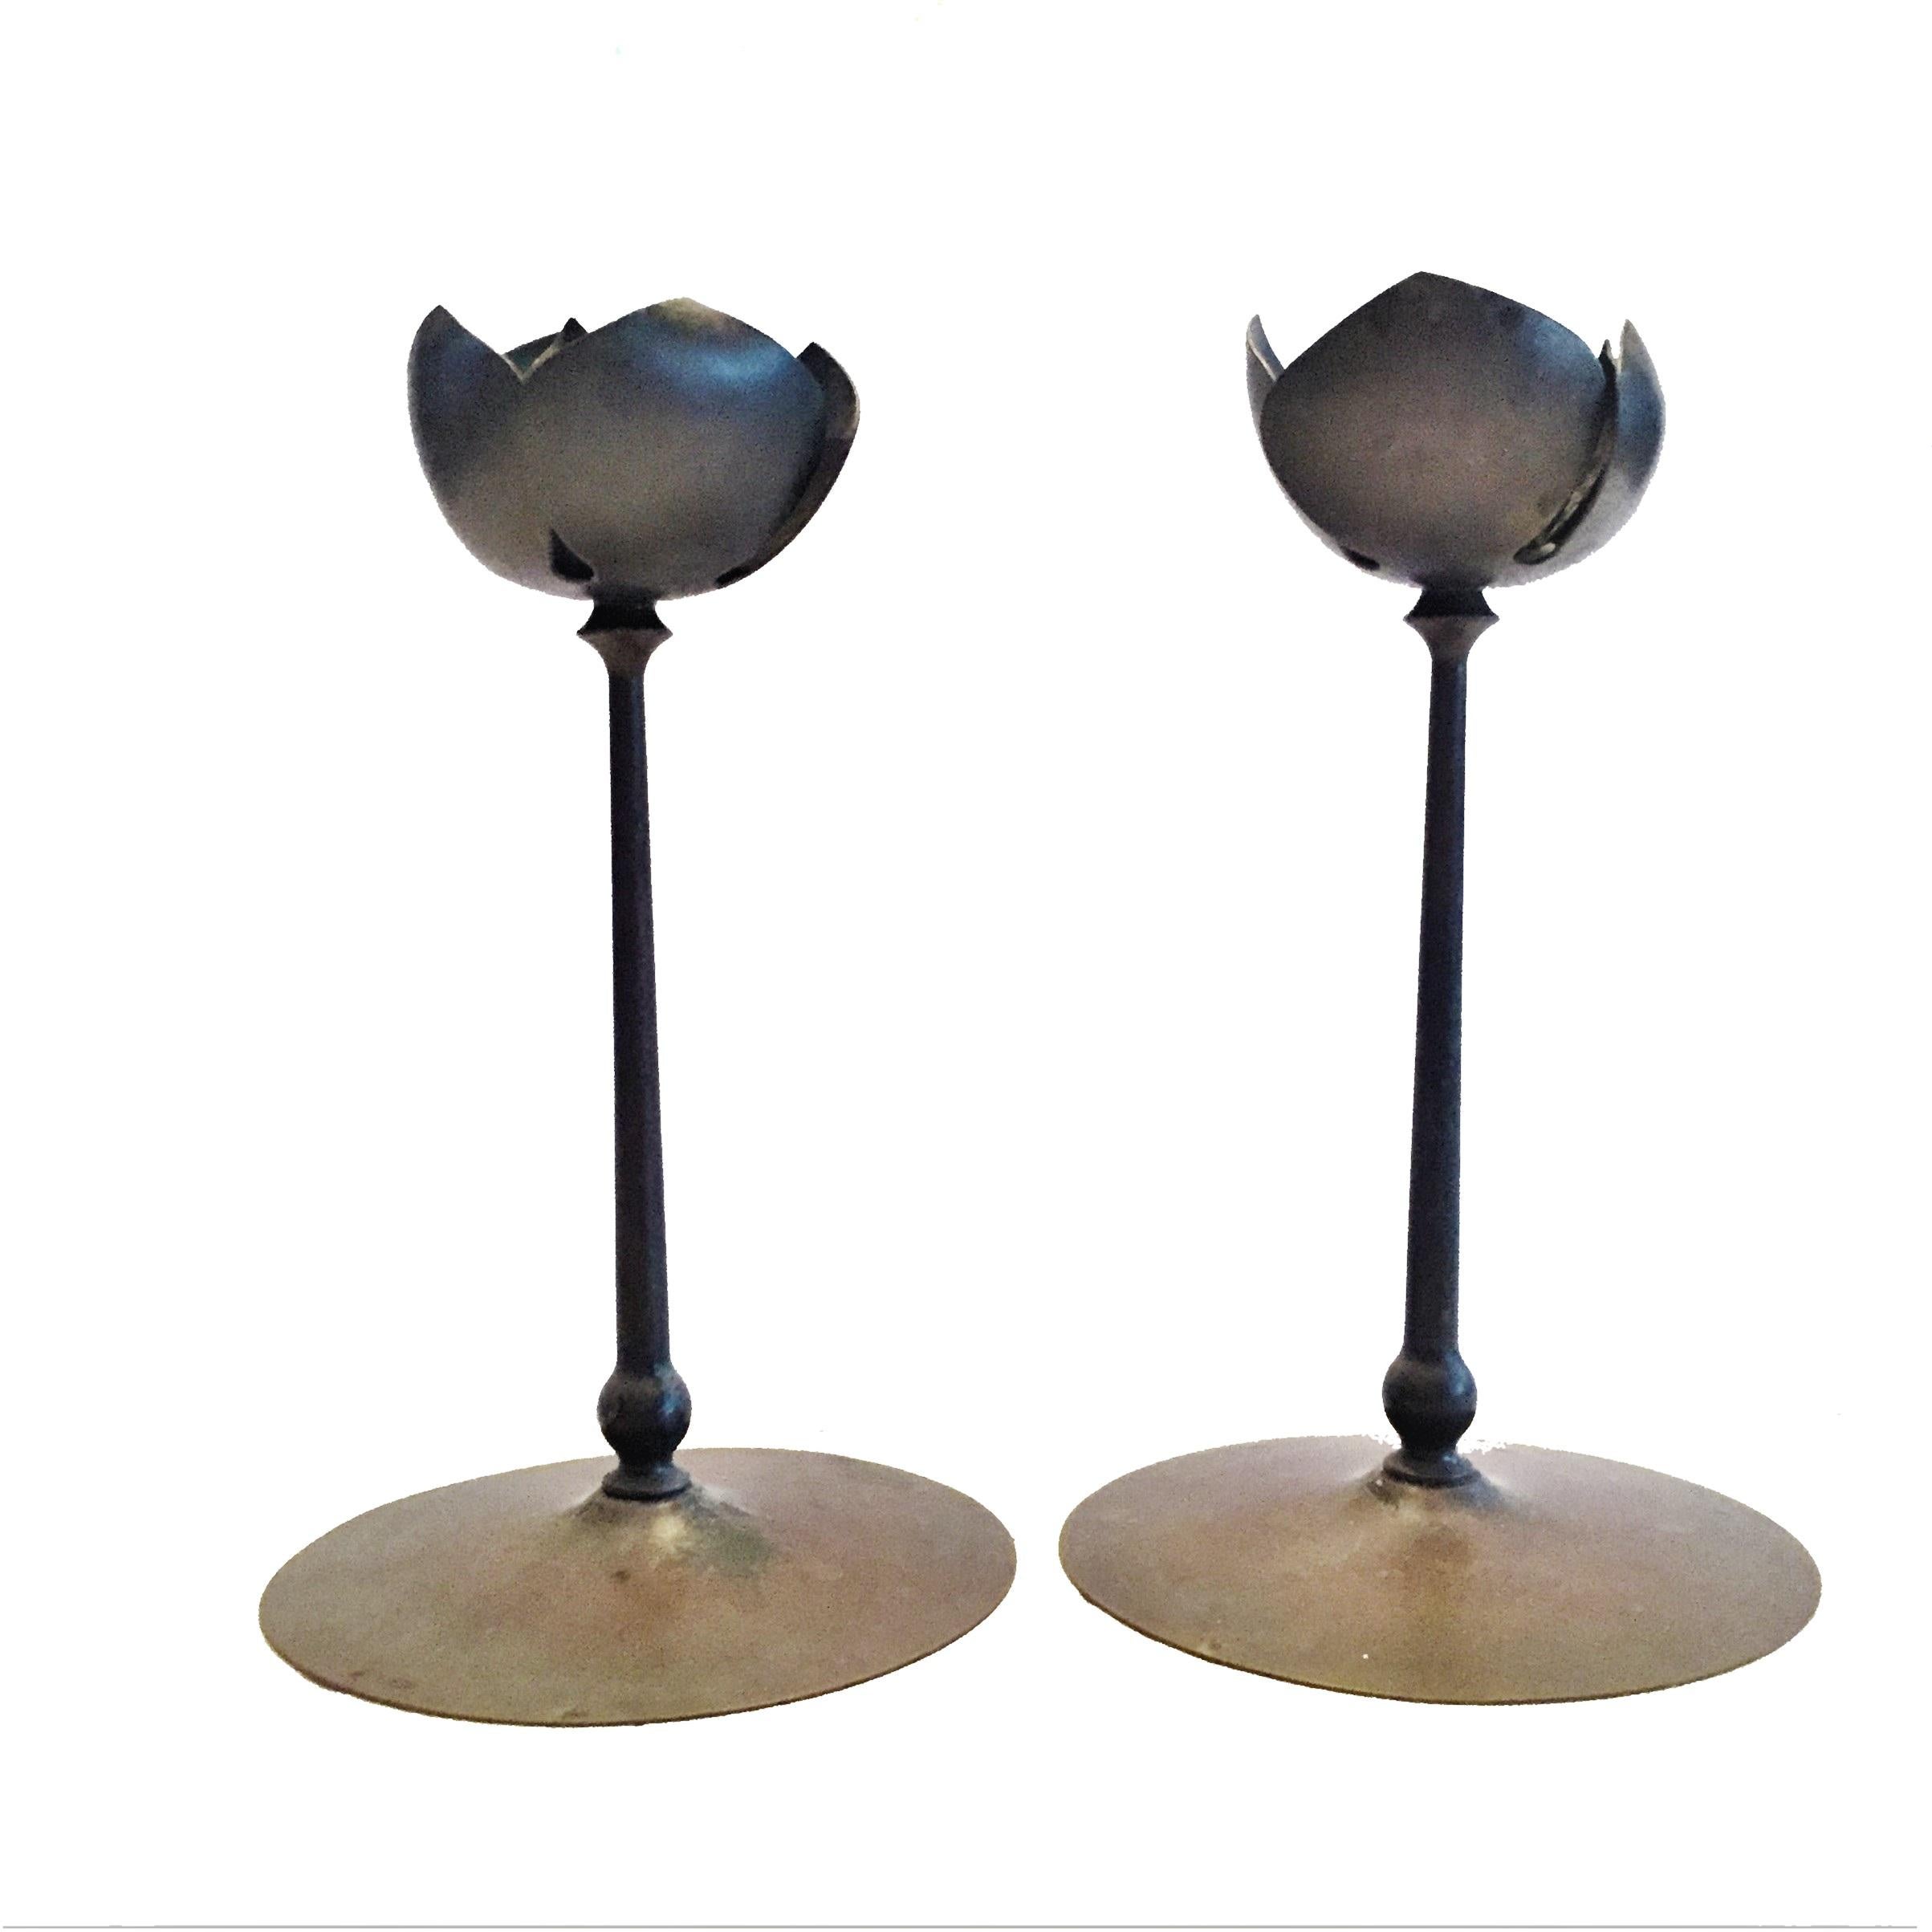 A duo of anodized brass candlesticks, each featuring a round base, stem and a lotus flower that contains a regular size candle. Manufactured in the USA during the 1960s. 

The candlesticks are unpolished, bear the original vintage patina, and